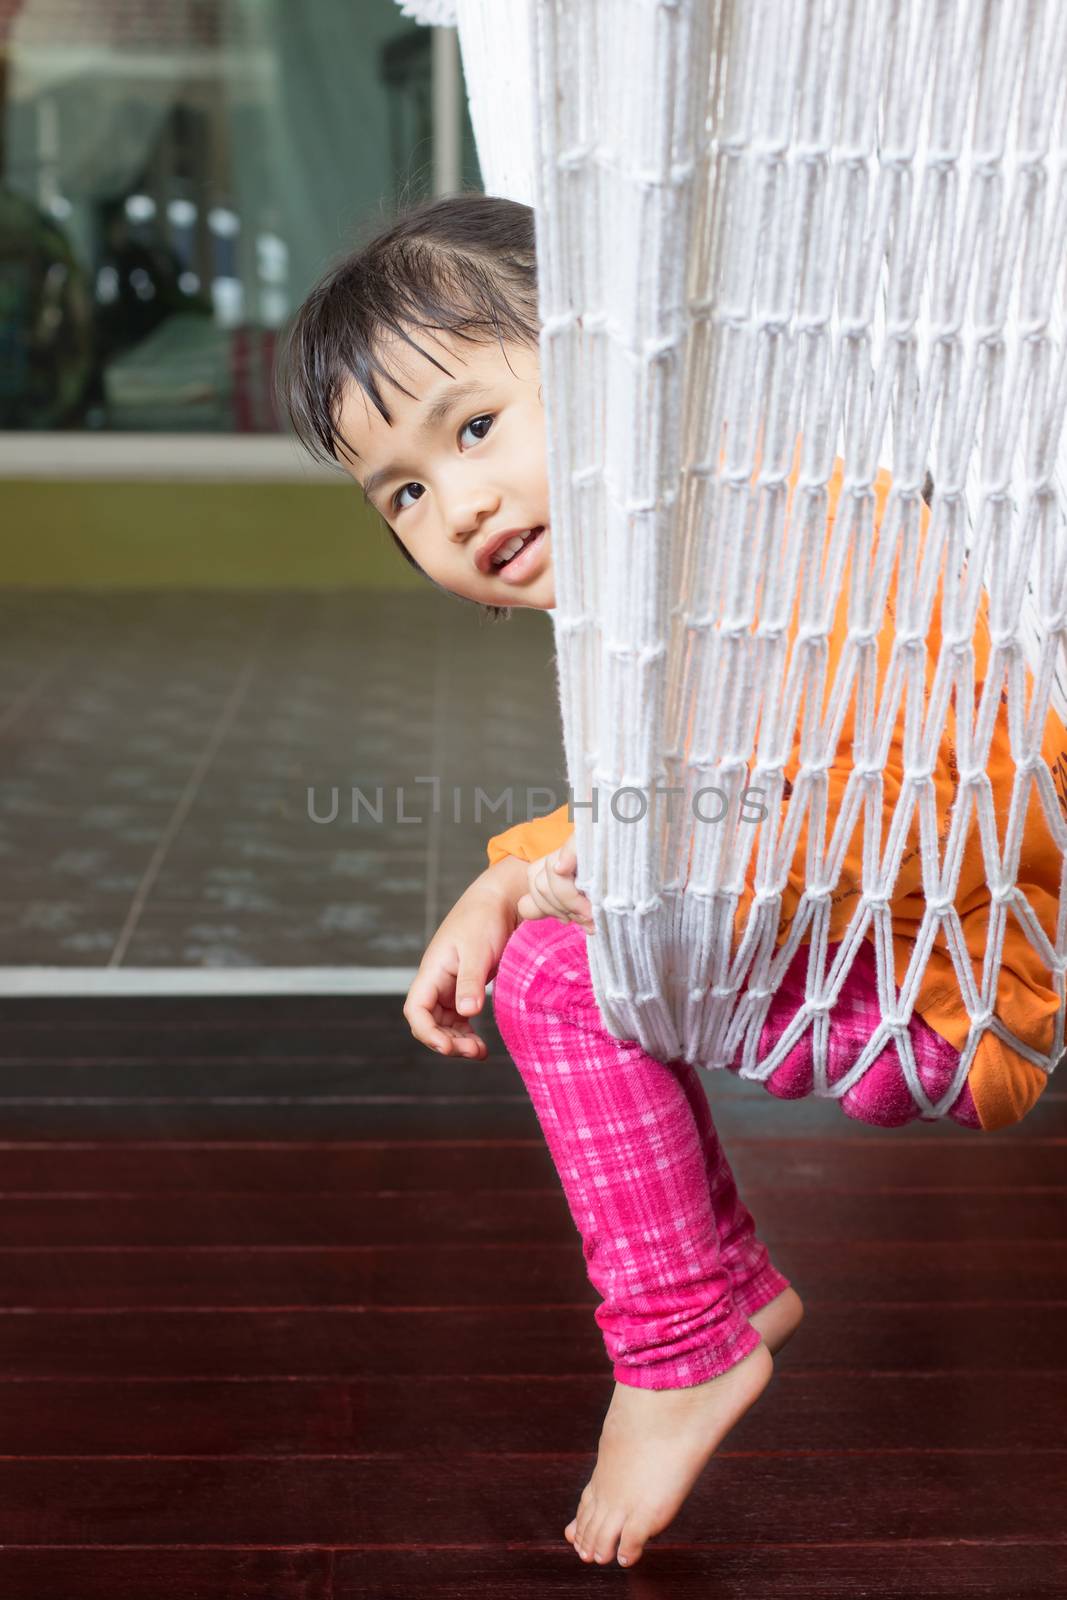 face of children sitting in clothes cradle and smiling use for f by khunaspix